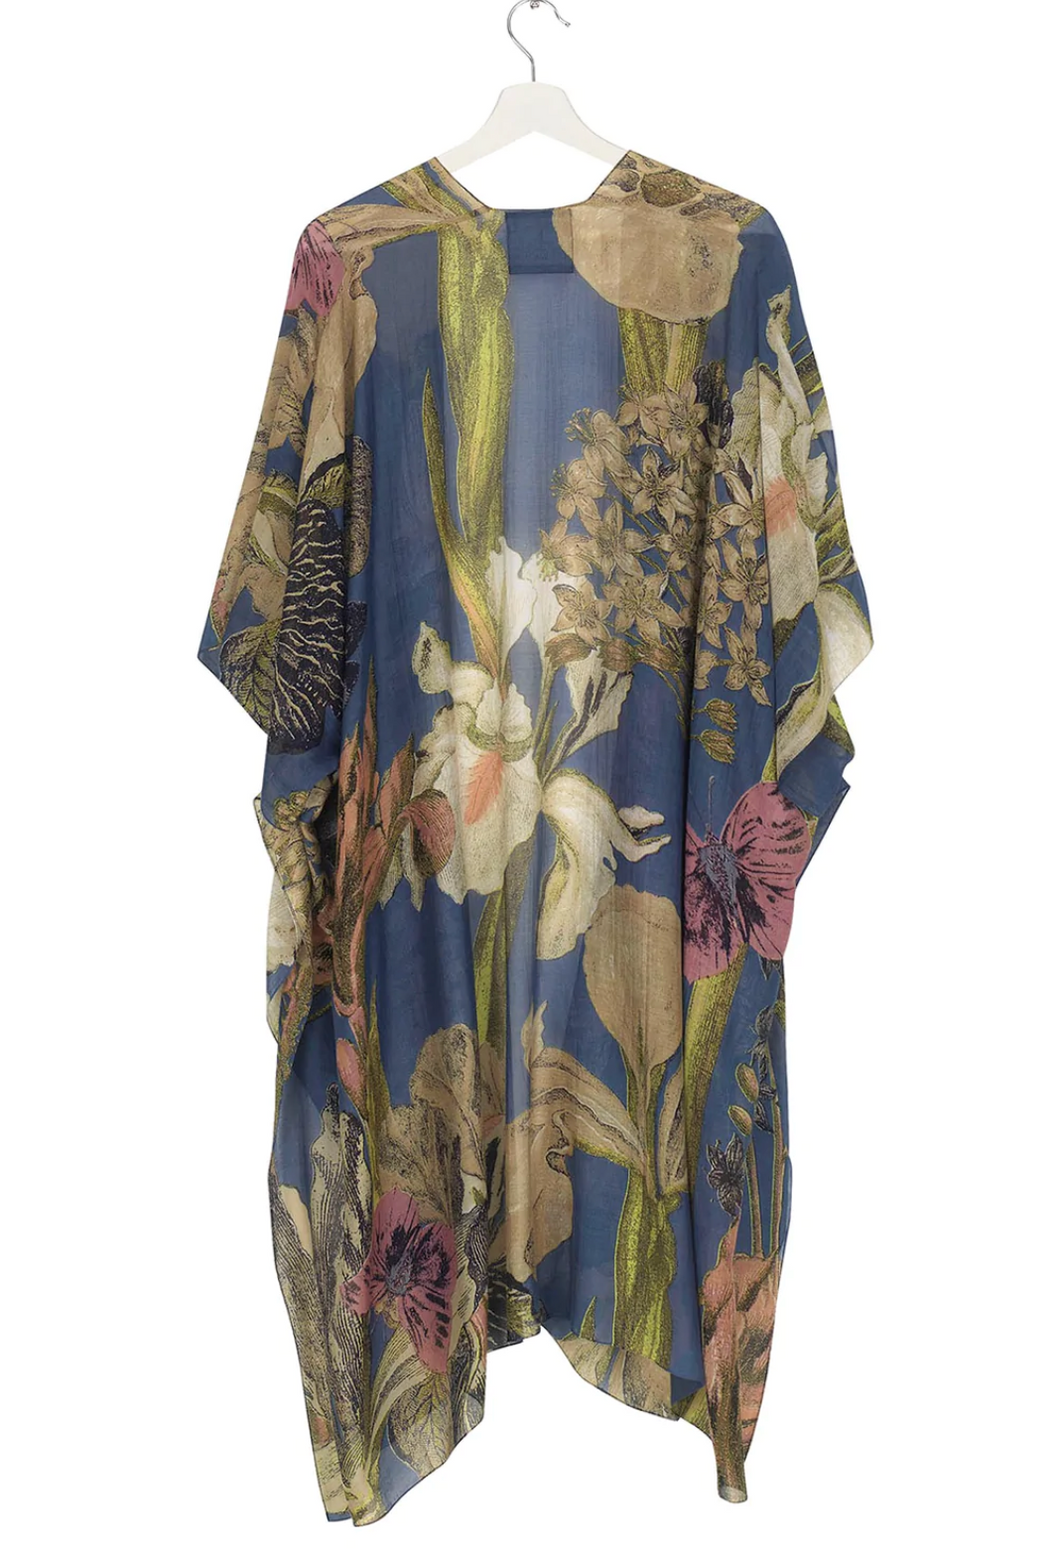 A mid length lightweight kimono in night blue with images takes from Kew Gardens of iris